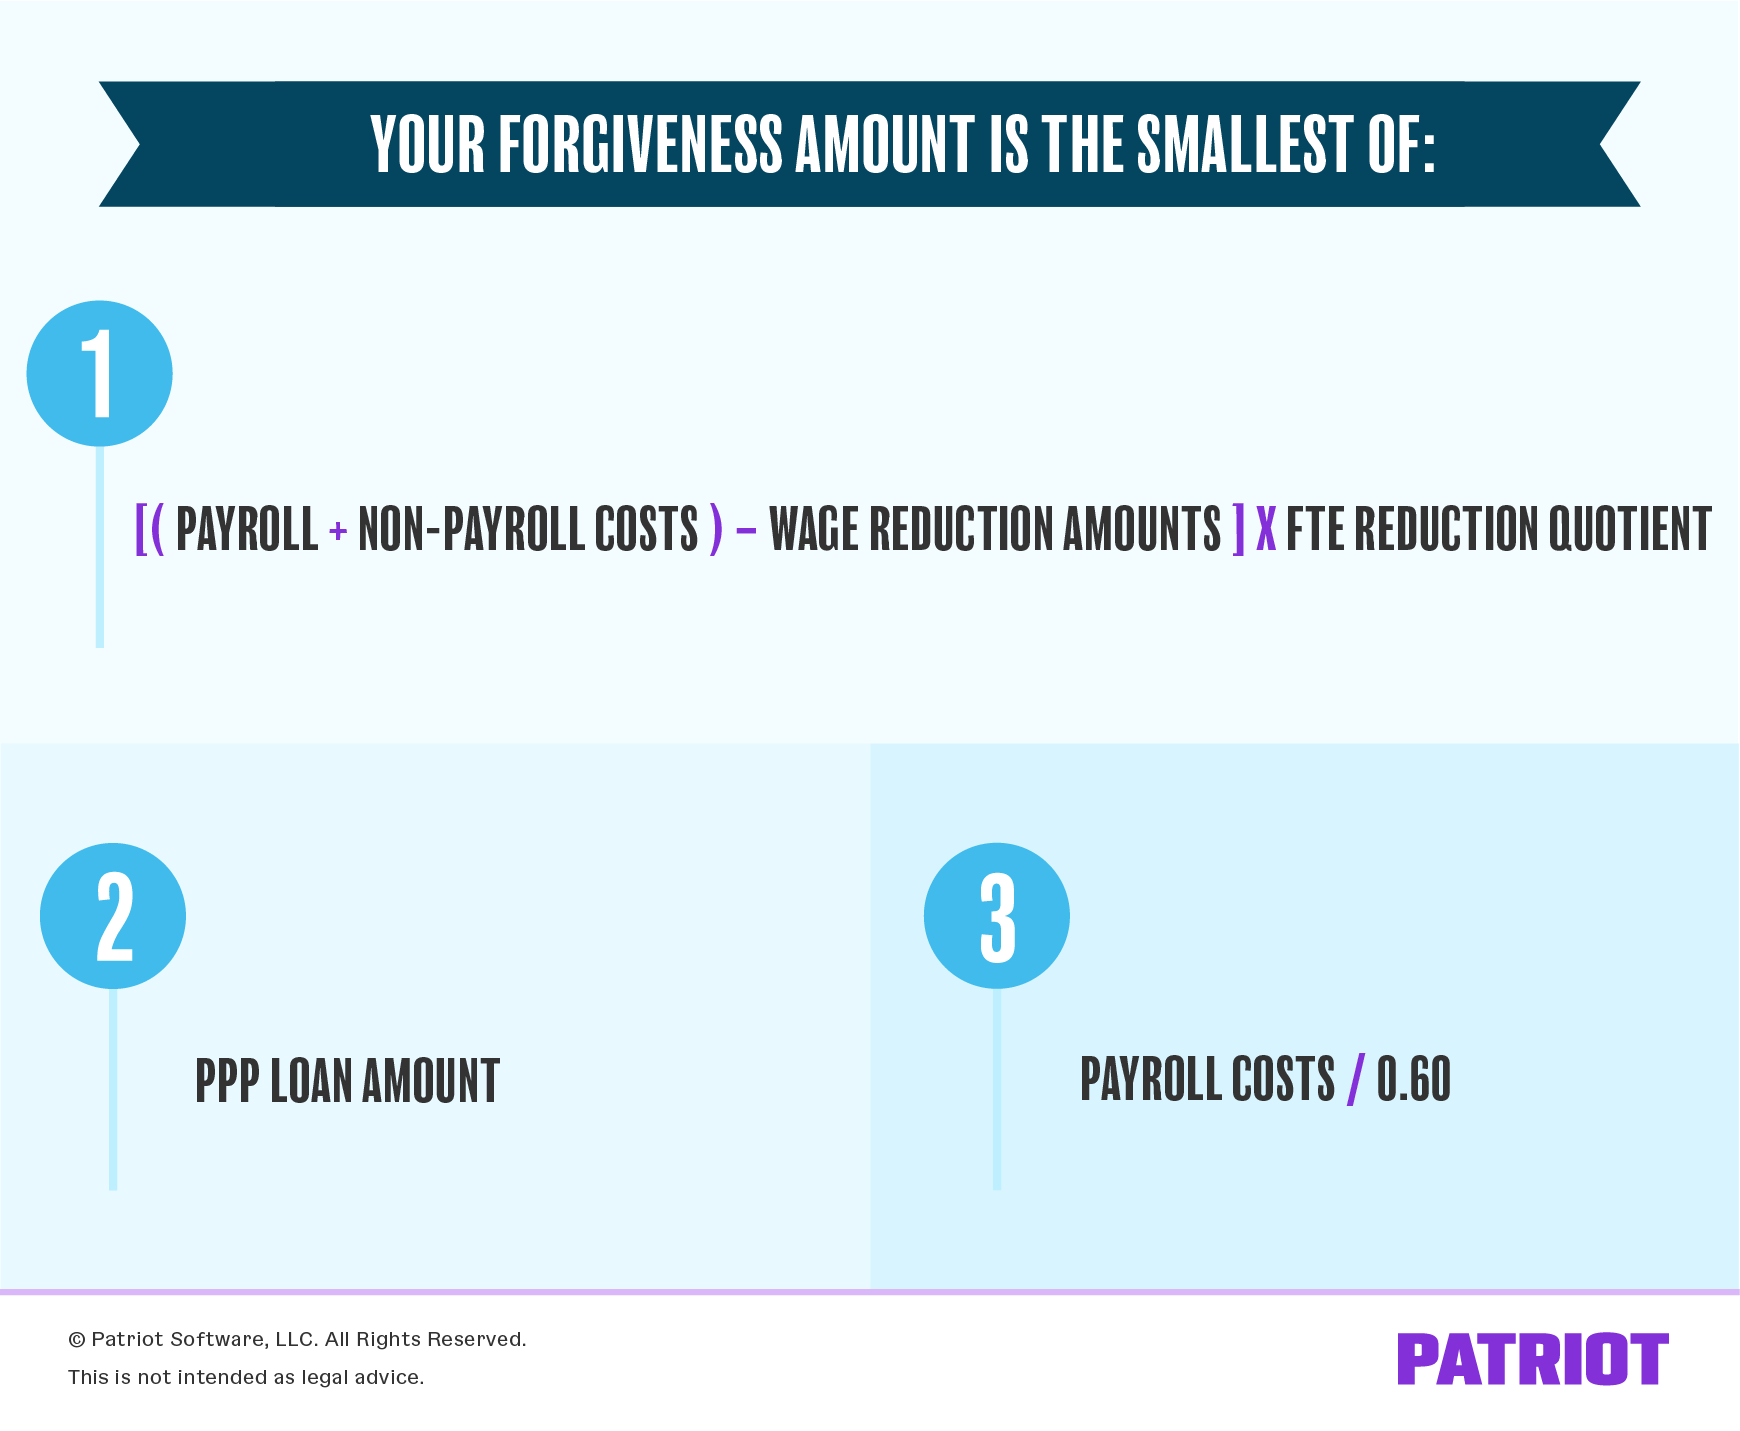 Infographic saying that PPP forgiveness amount is the smallest of Lines 12, 13, or 14 on Form 3508